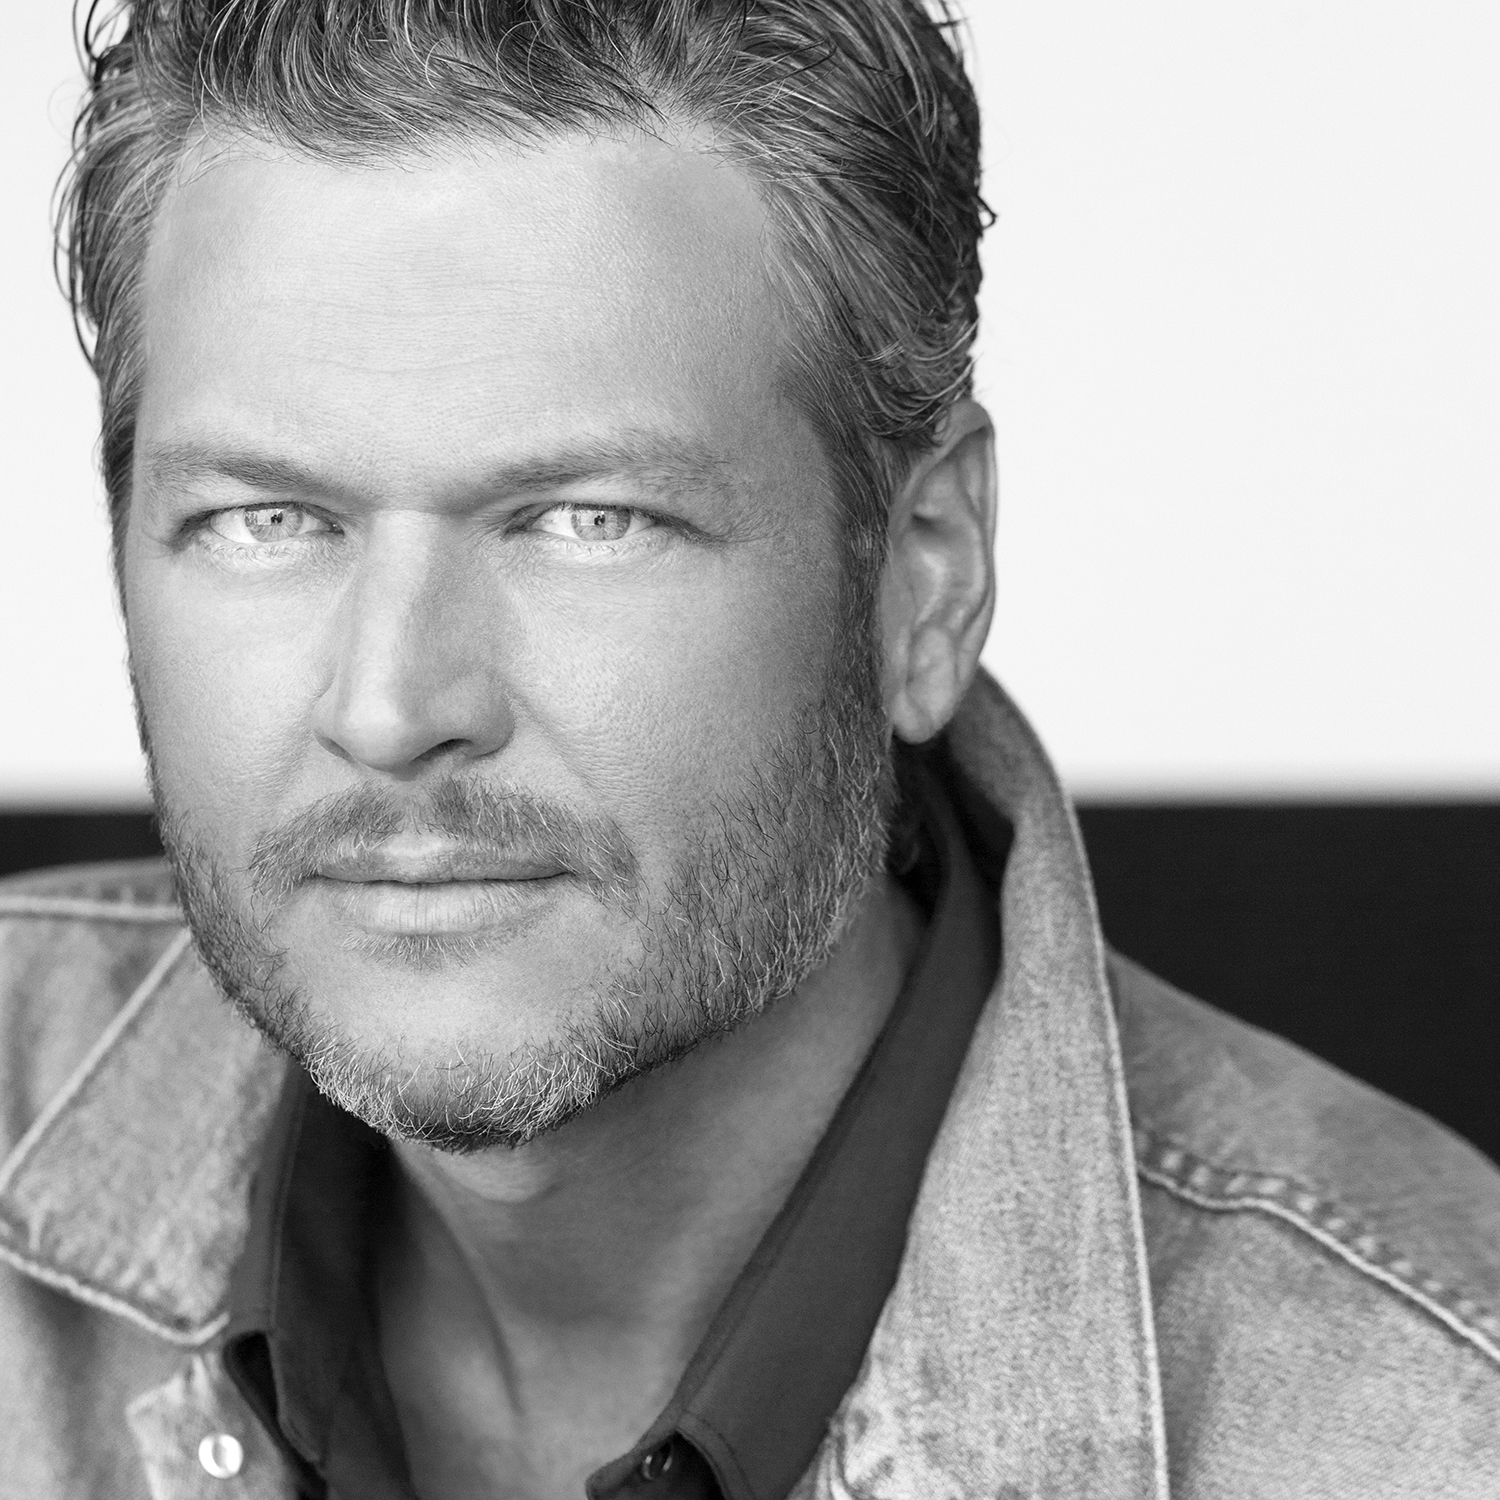 BLAKE SHELTON’S “A GUY WITH A GIRL” HOLDS MULTI-WEEK RUN ON TOP OF THE CHARTS